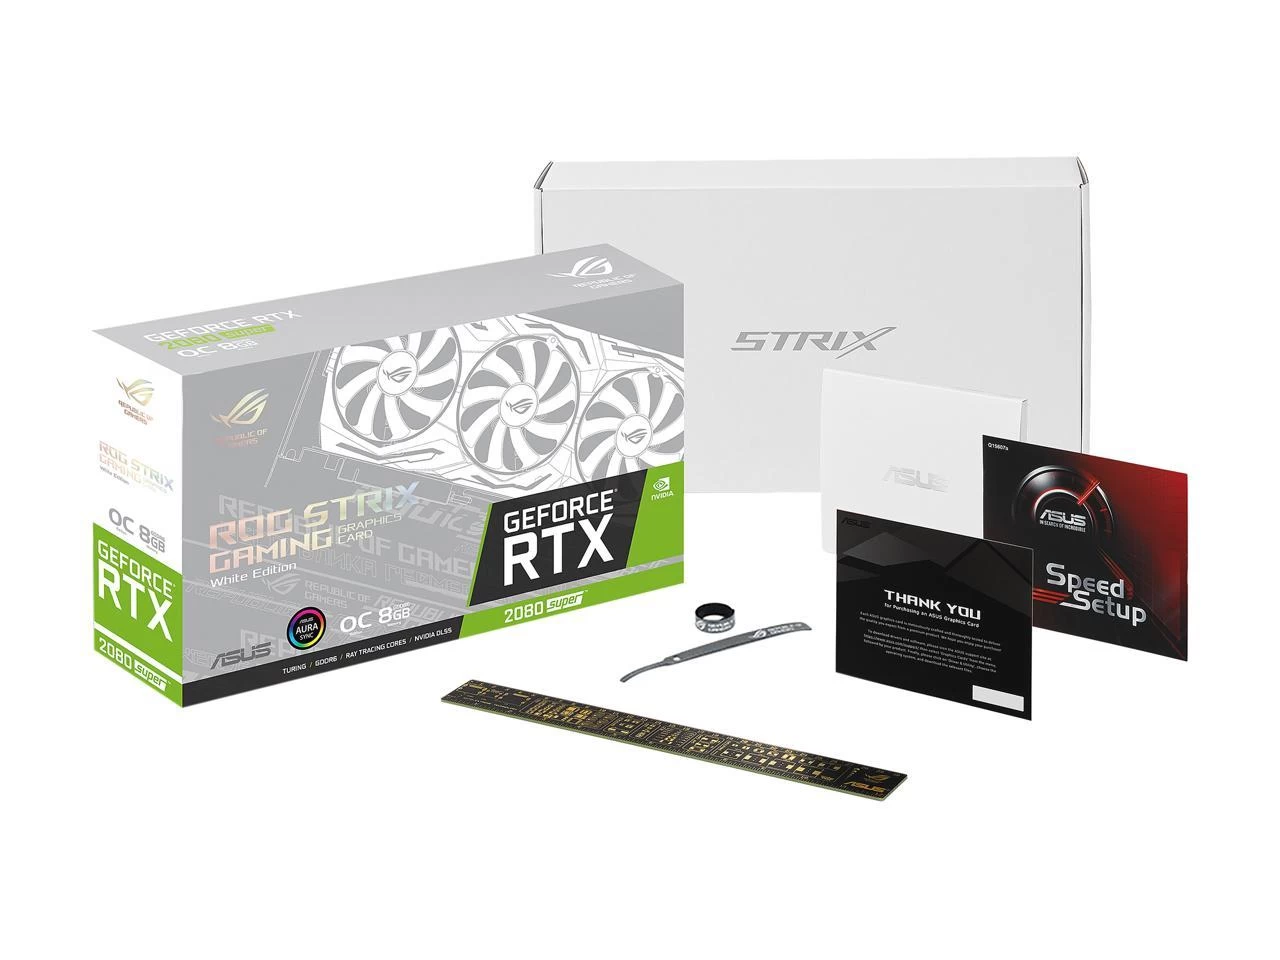 ASUS ROG STRIX RTX 2080 SUPER White GAMING OC Package Content